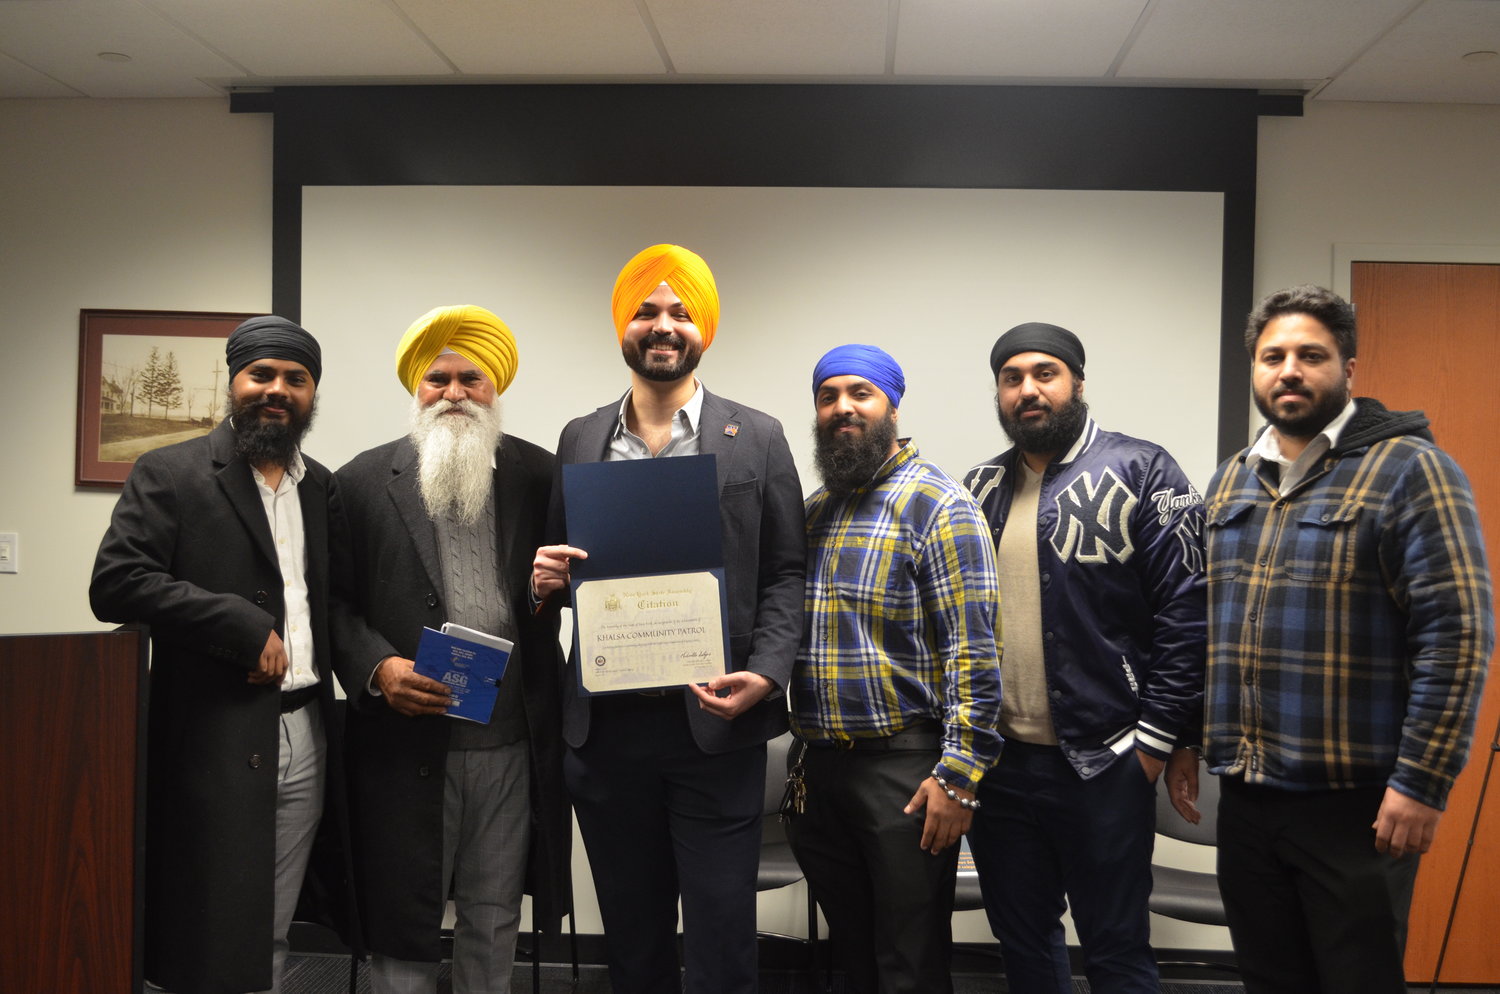 Sikh community leaders in Richmond Hill, Queens, from left Gurpreet Singh, Daler Singh, Japneet Singh, Chitinderpal Singh, Gurjot Singh and Harmanpreet Singh, who participated in the South Asian Town Hall at Elmont Memorial Public Library. One of their organizations, the Khalsa Community Patrol, strives to make the neighborhood safer for those impacted by the rise in hate crimes in the area.